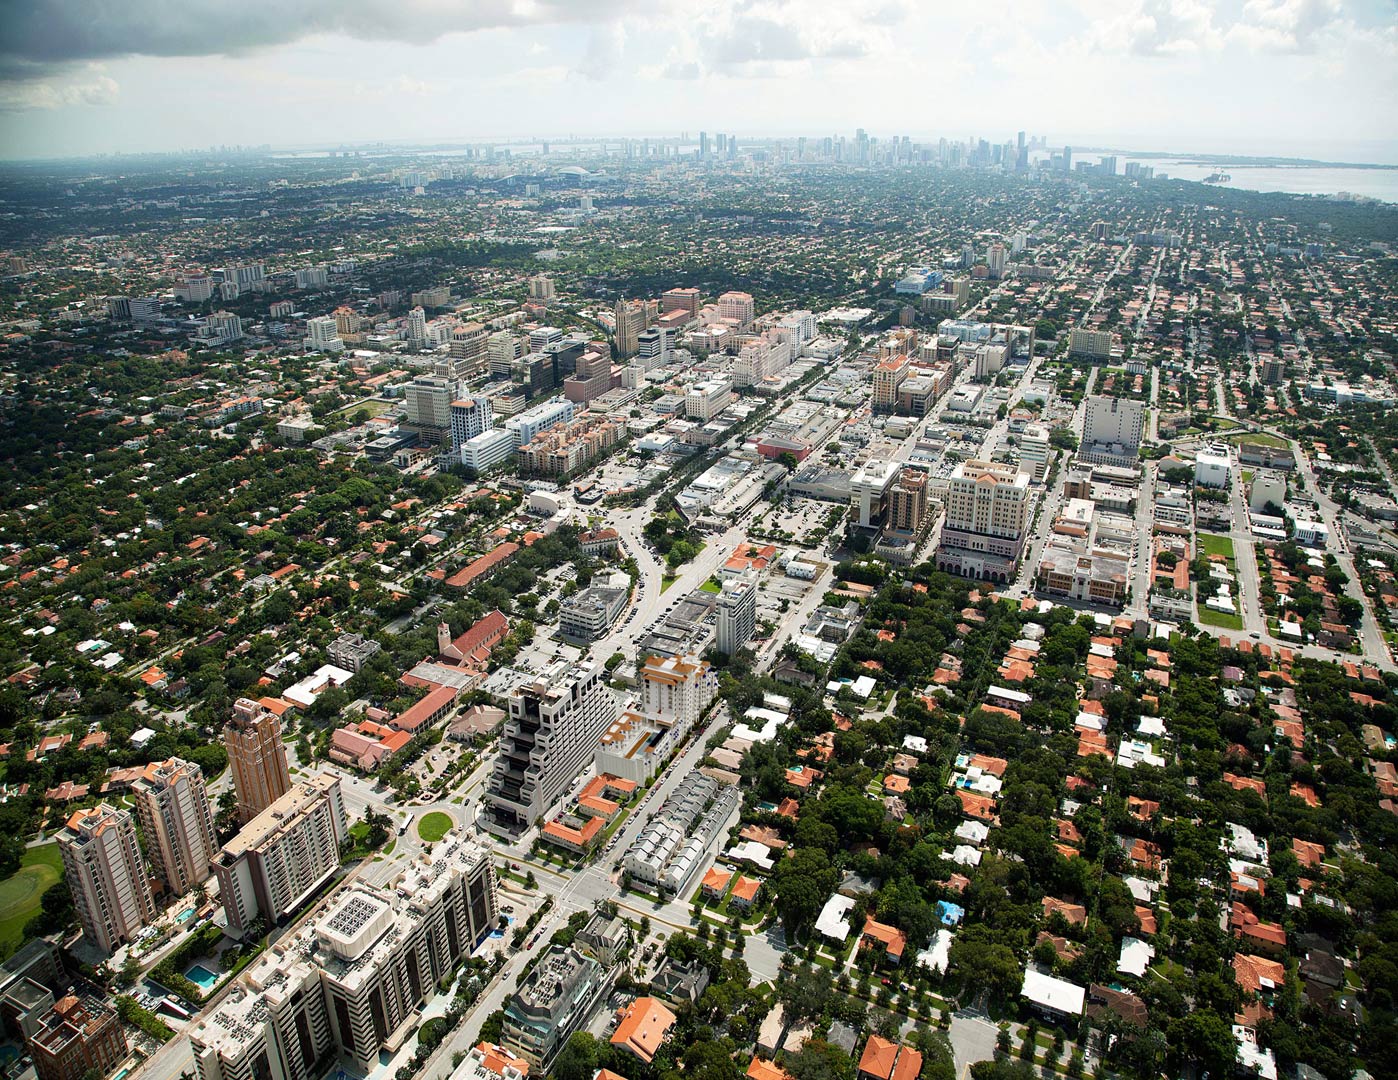 Residential location in Miami - Aerial Image